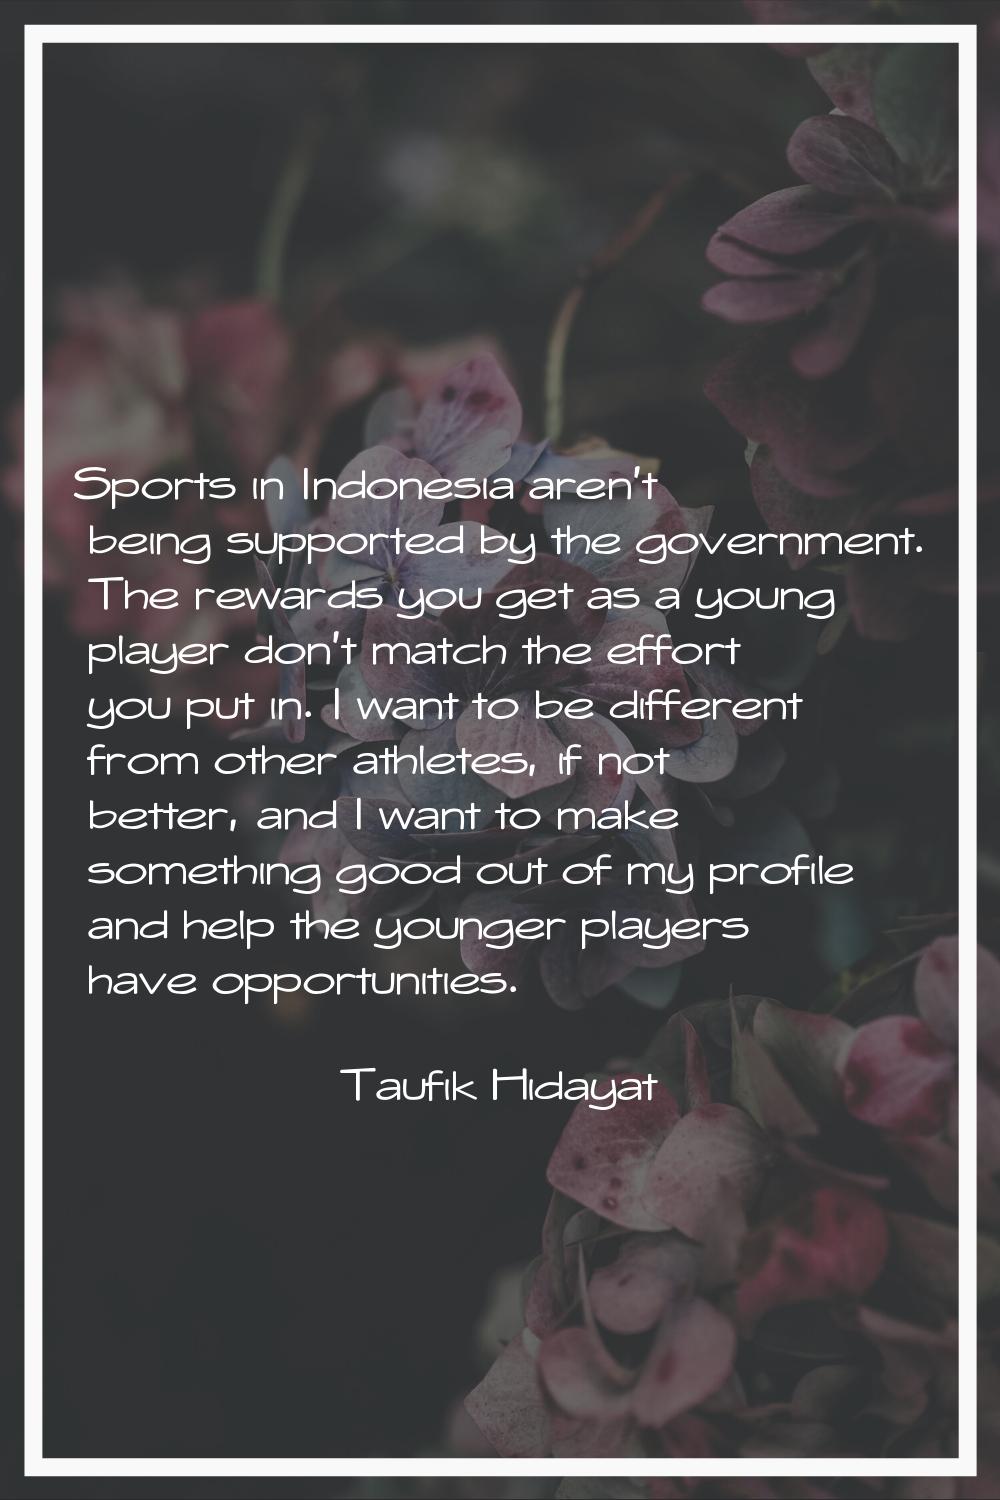 Sports in Indonesia aren't being supported by the government. The rewards you get as a young player